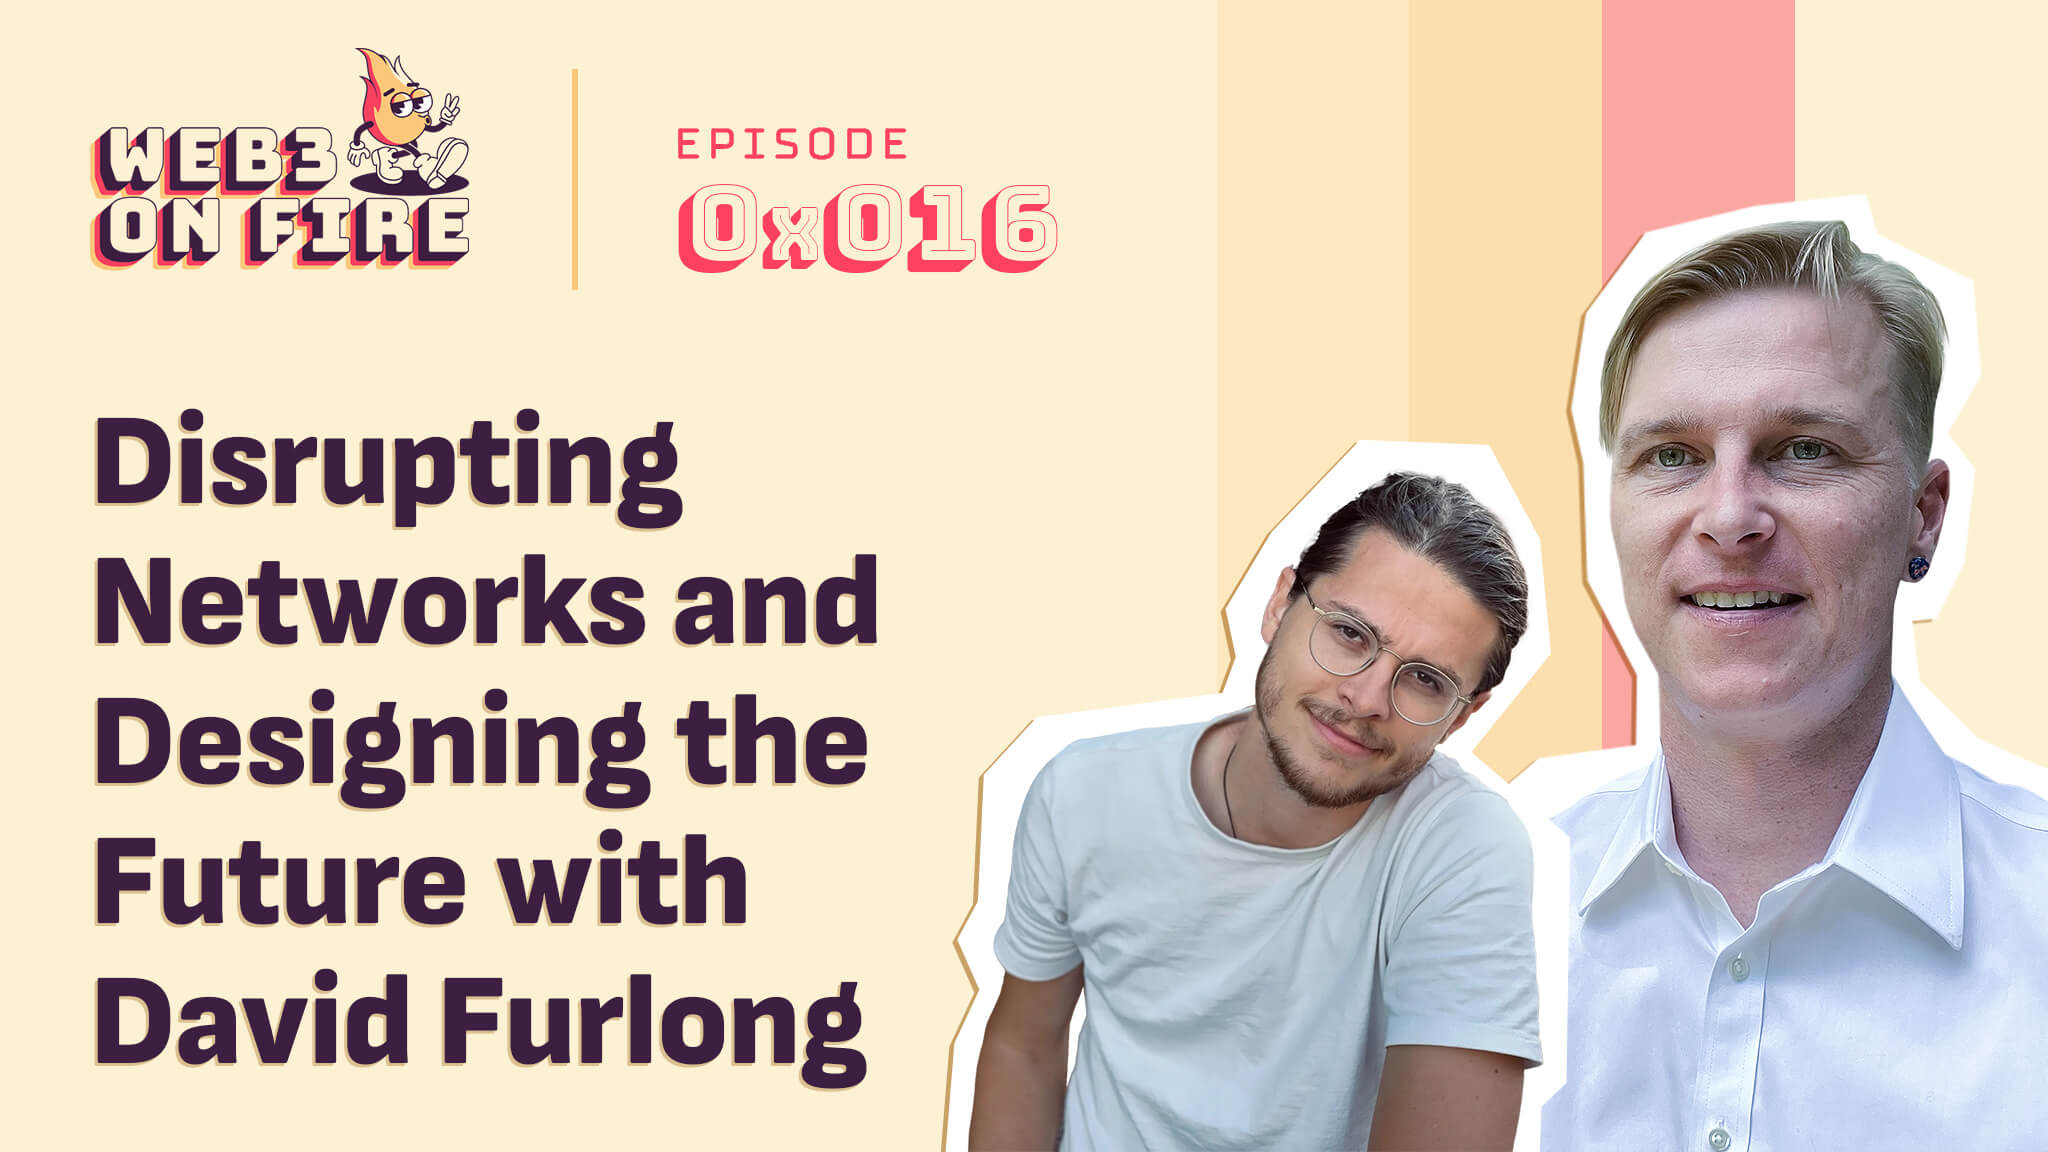 Disrupting Networks and Designing the Future with David Furlong